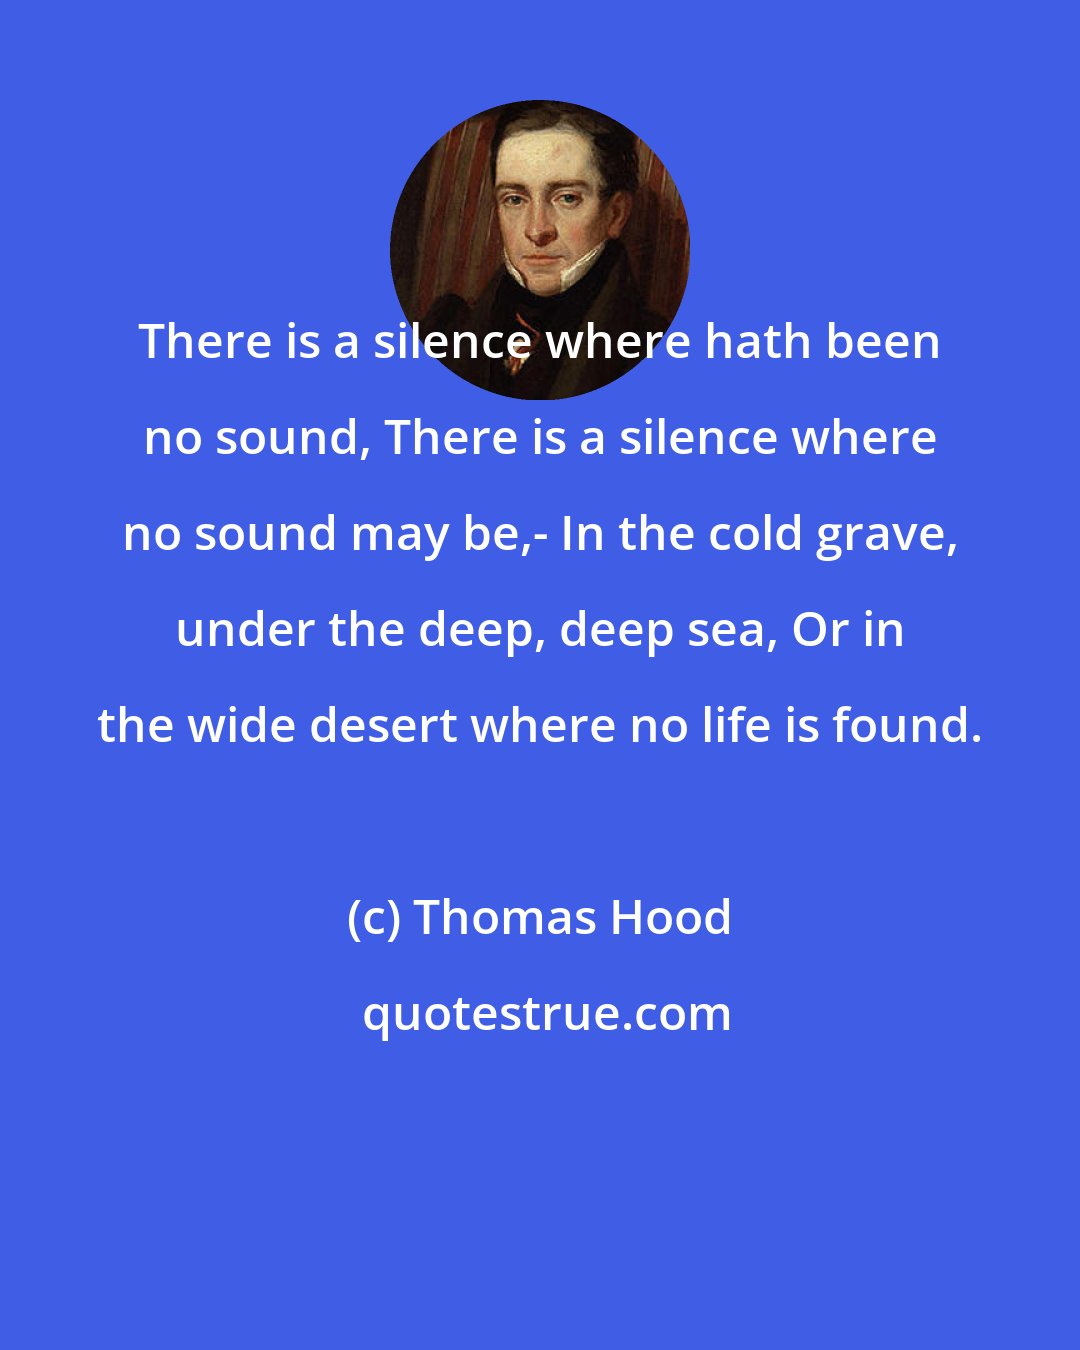 Thomas Hood: There is a silence where hath been no sound, There is a silence where no sound may be,- In the cold grave, under the deep, deep sea, Or in the wide desert where no life is found.